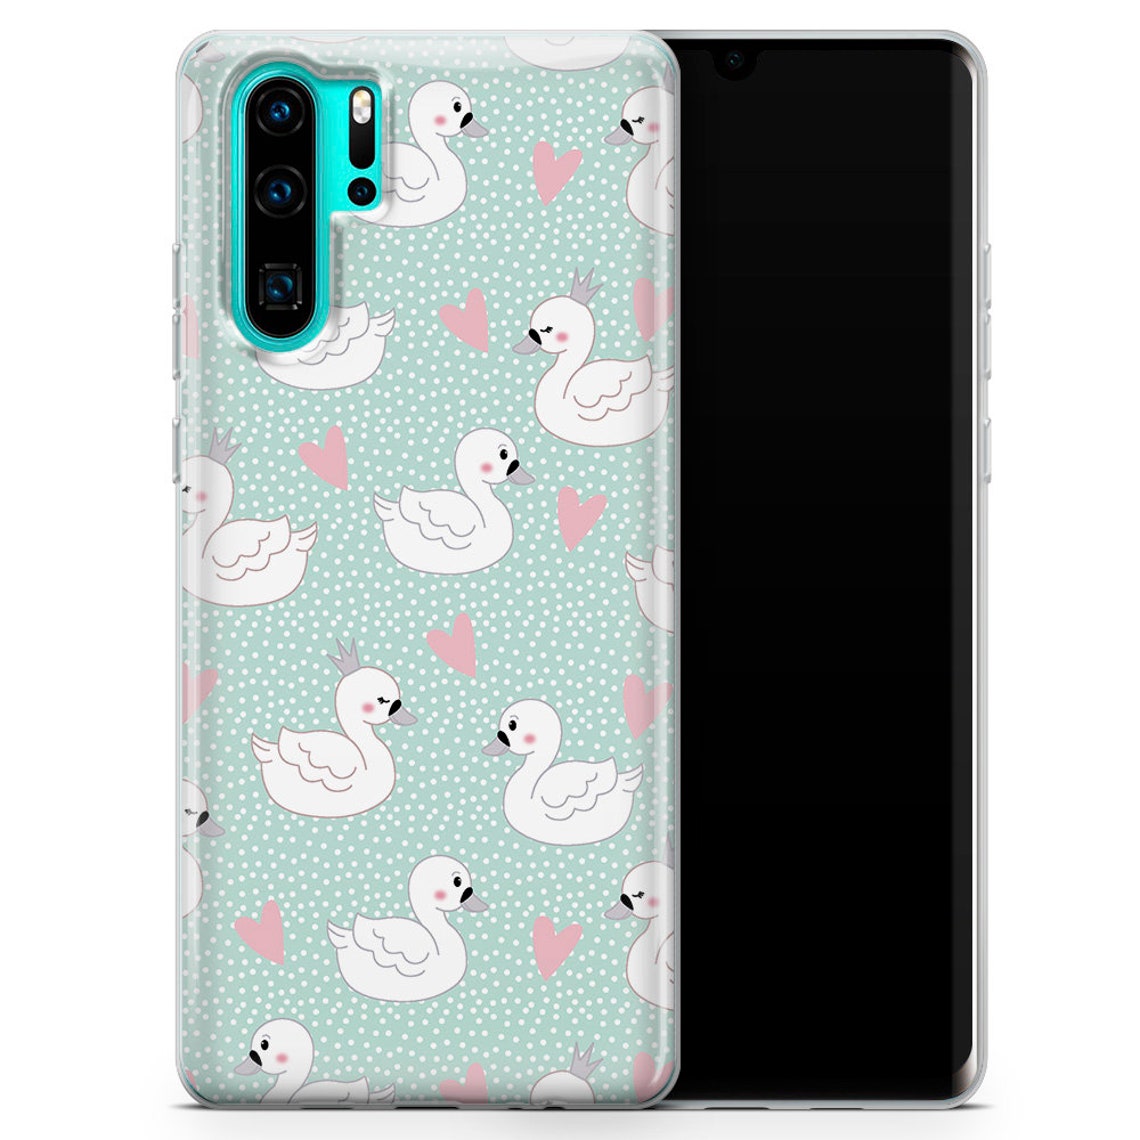 Cute Kawaii Collage Phone Case fit for Huawei Mate 20 Huawei | Etsy